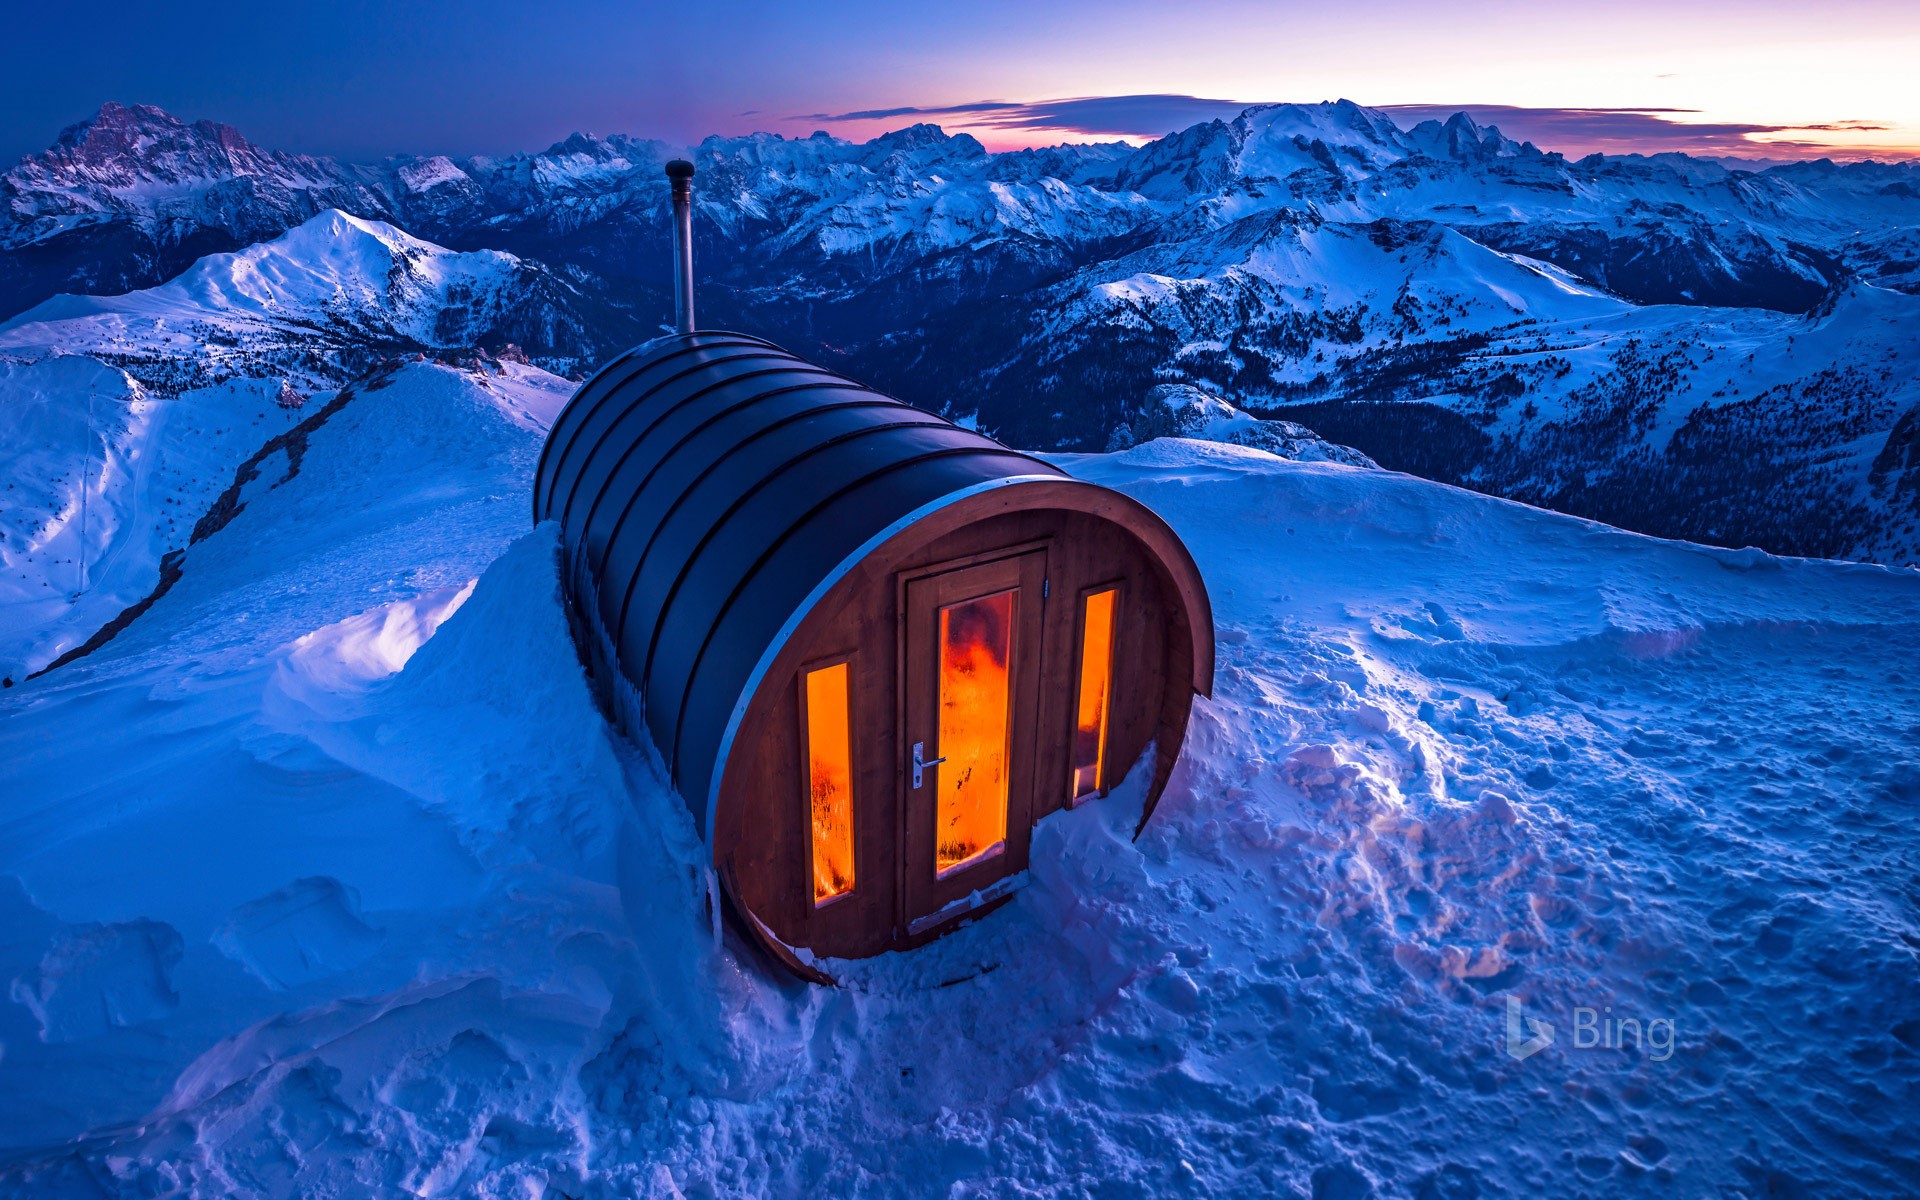 Sauna at Lagazuoi in the Dolomites of Italy